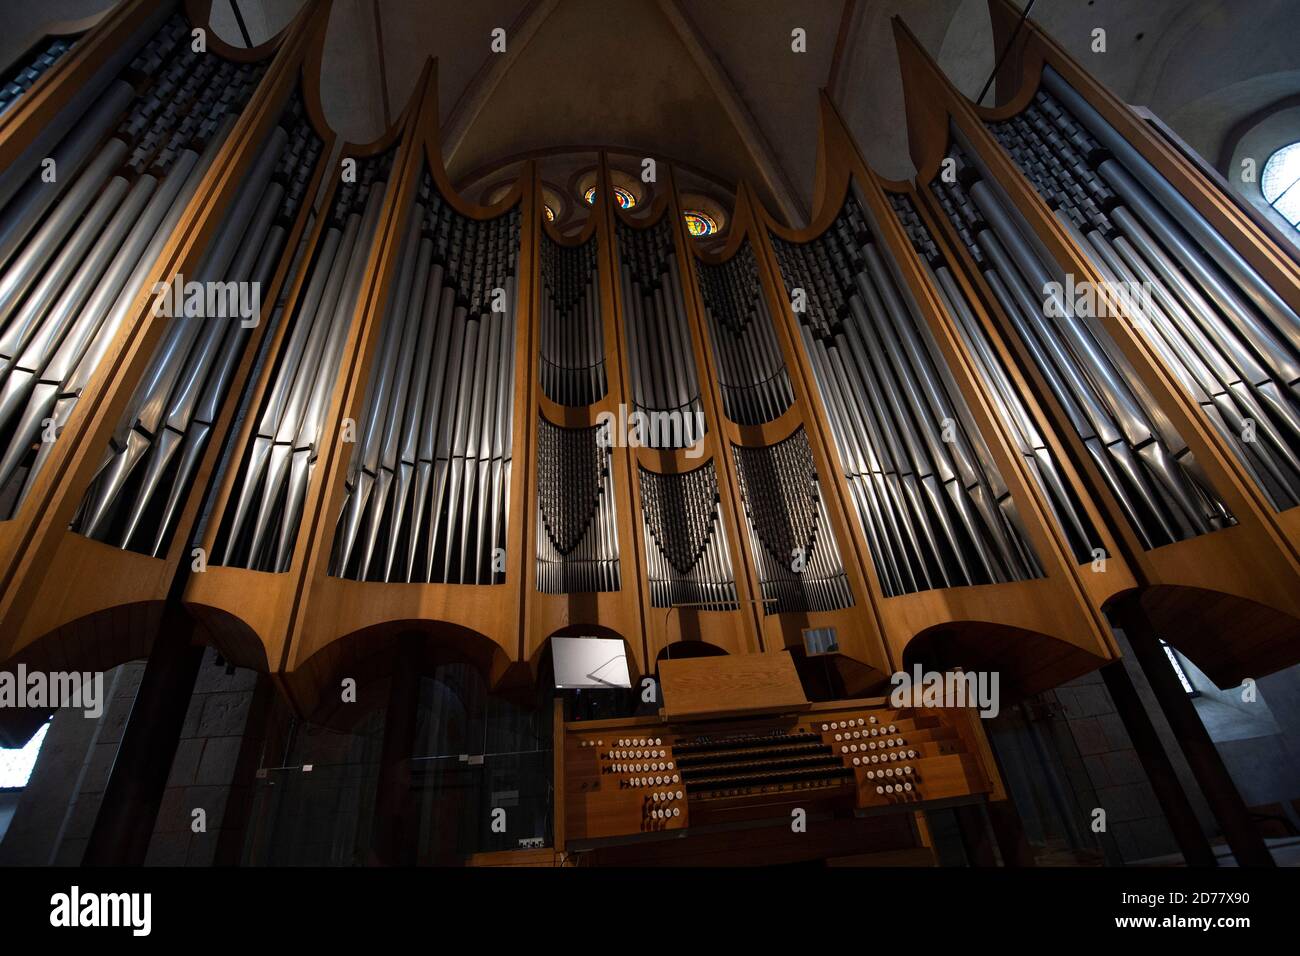 Limburg, Deutschland. 20th Oct, 2020. Interior view of Limburg Cathedral, organ, four-manual game table, Limburg Cathedral, also known as St. Â | usage worldwide Credit: dpa/Alamy Live News Stock Photo